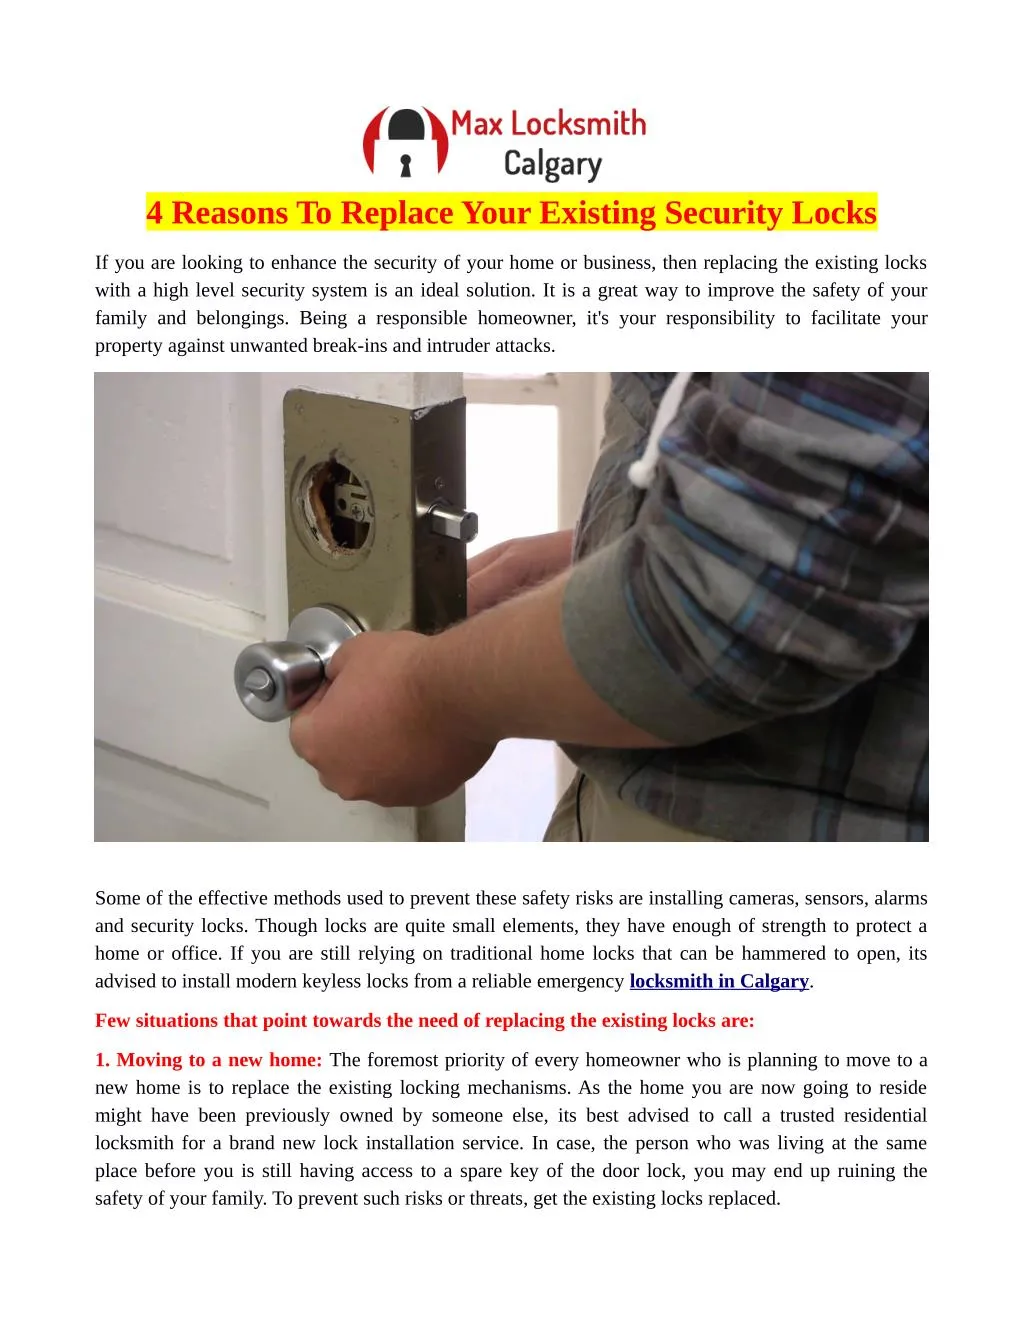 4 reasons to replace your existing security locks